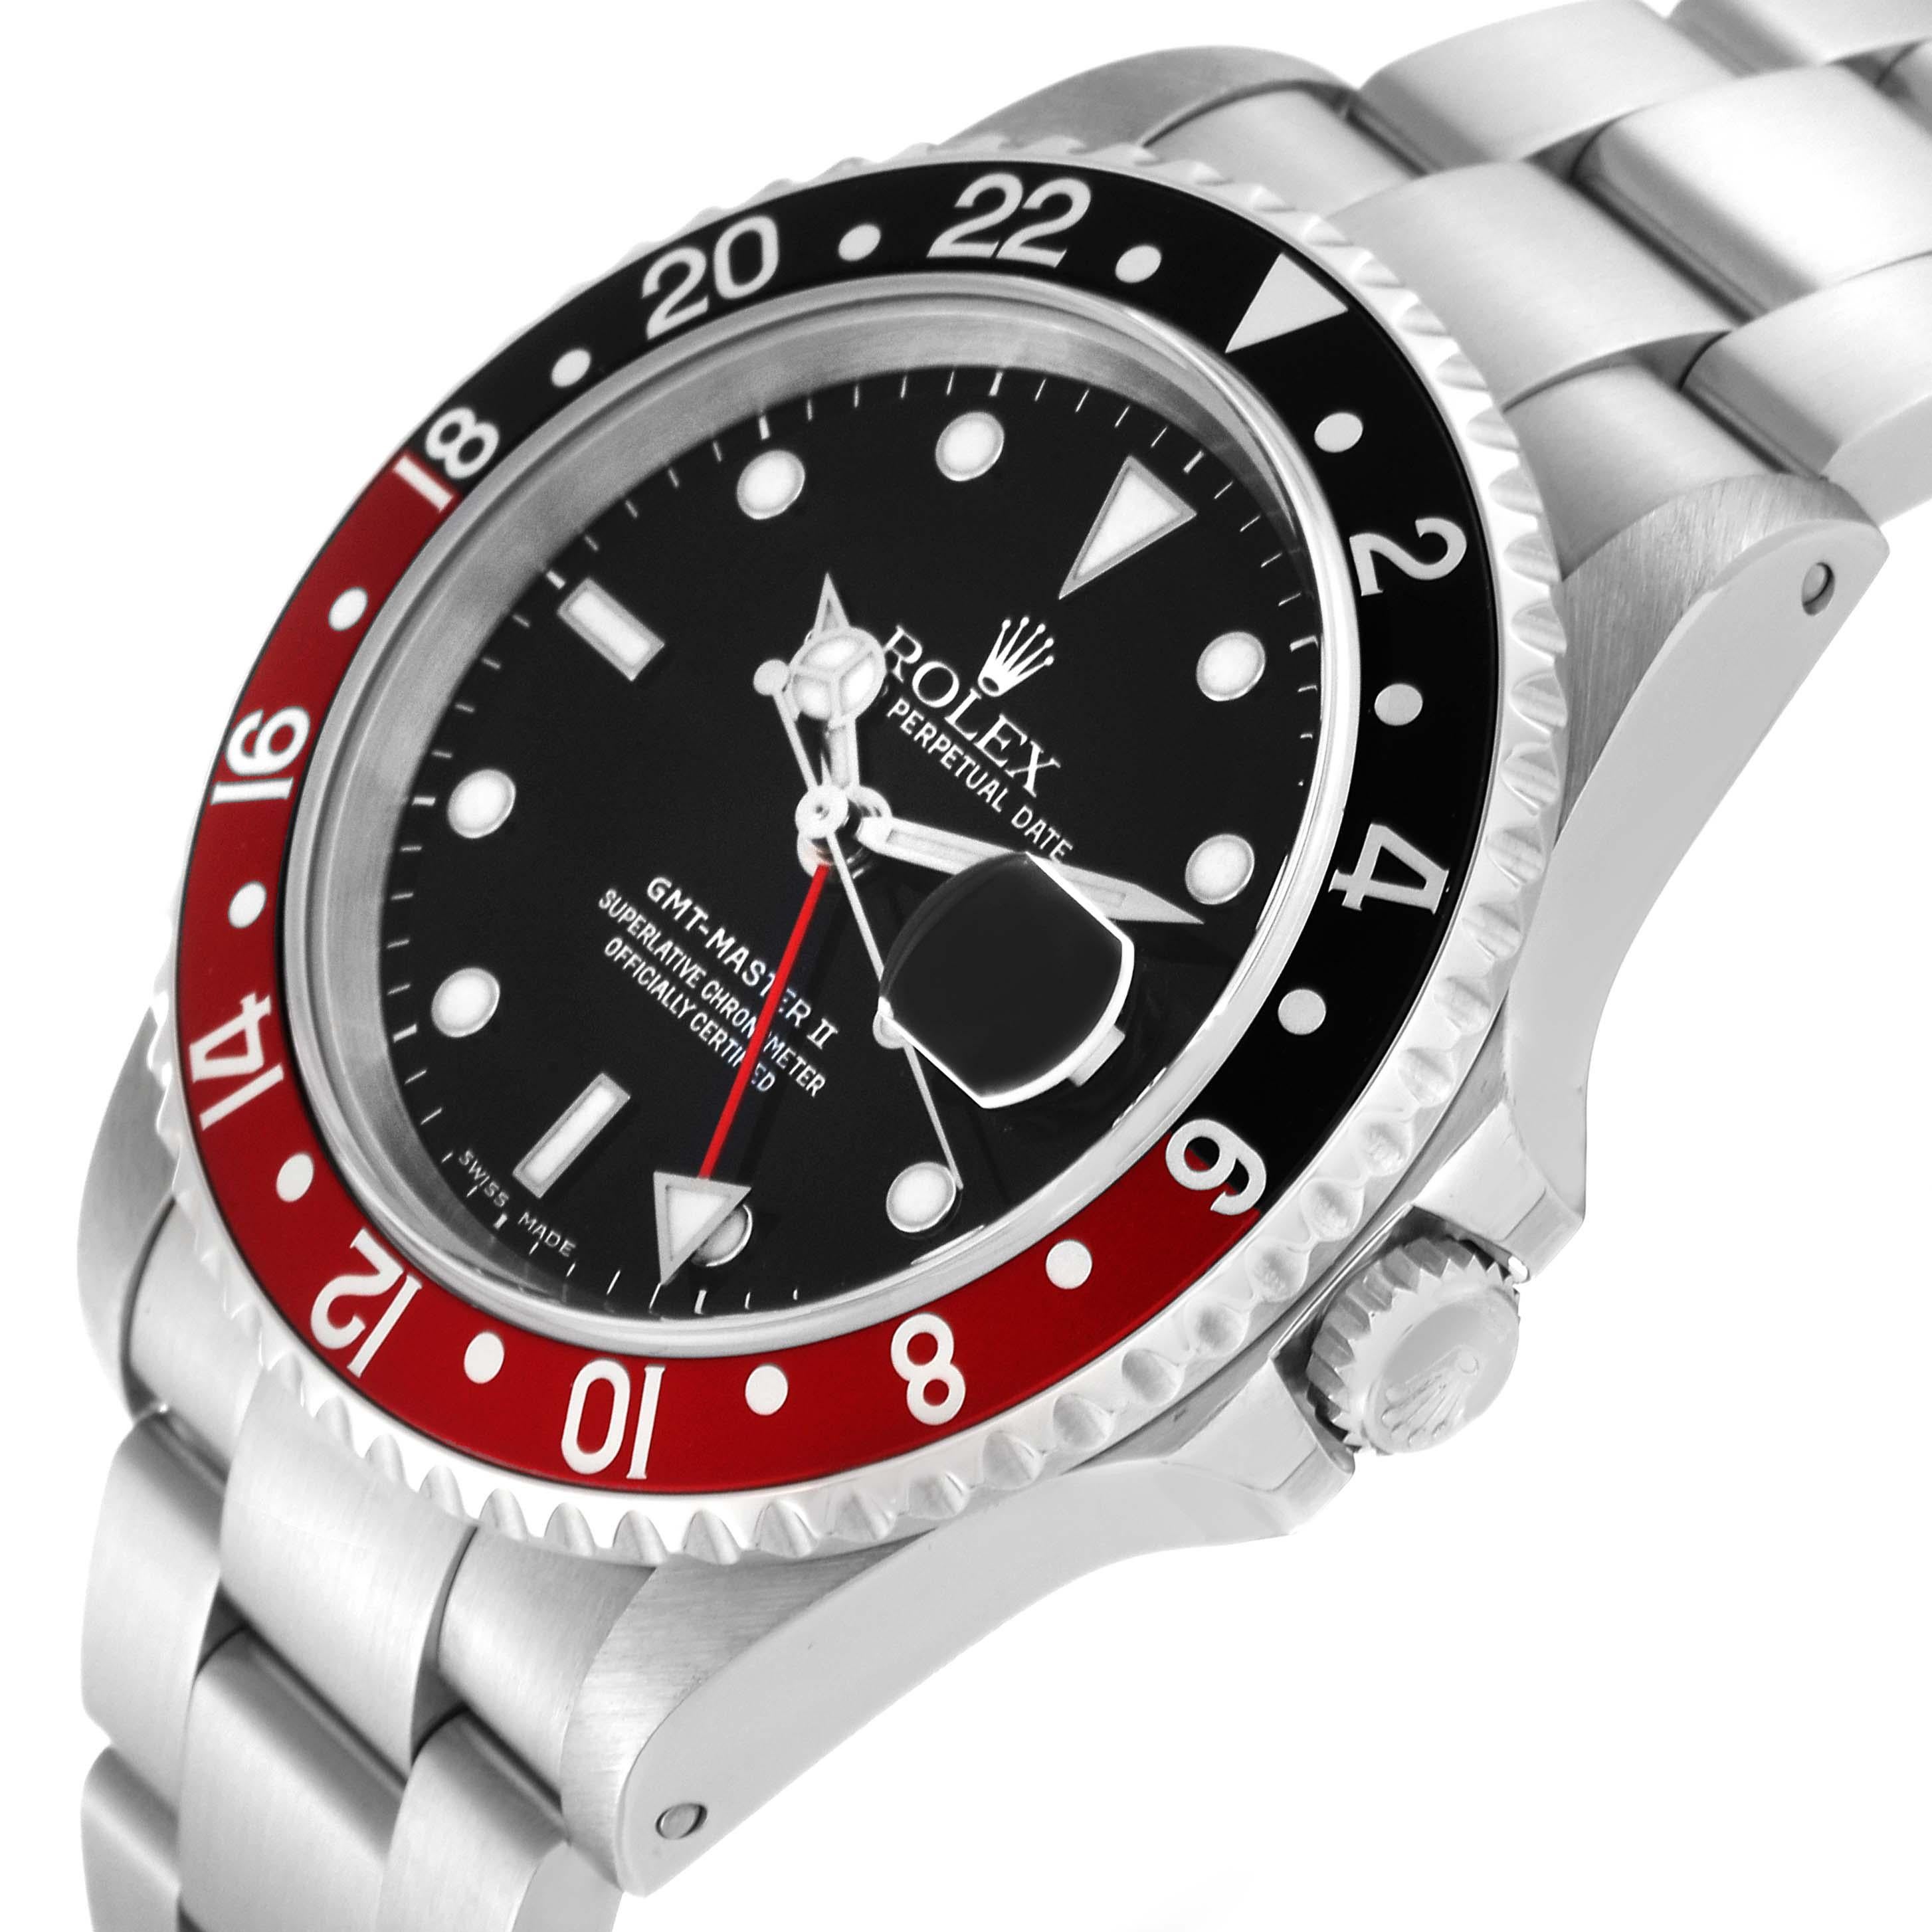  Rolex GMT Master II Black Red Coke Bezel Steel Mens Watch 16710 Box Papers Pour hommes 